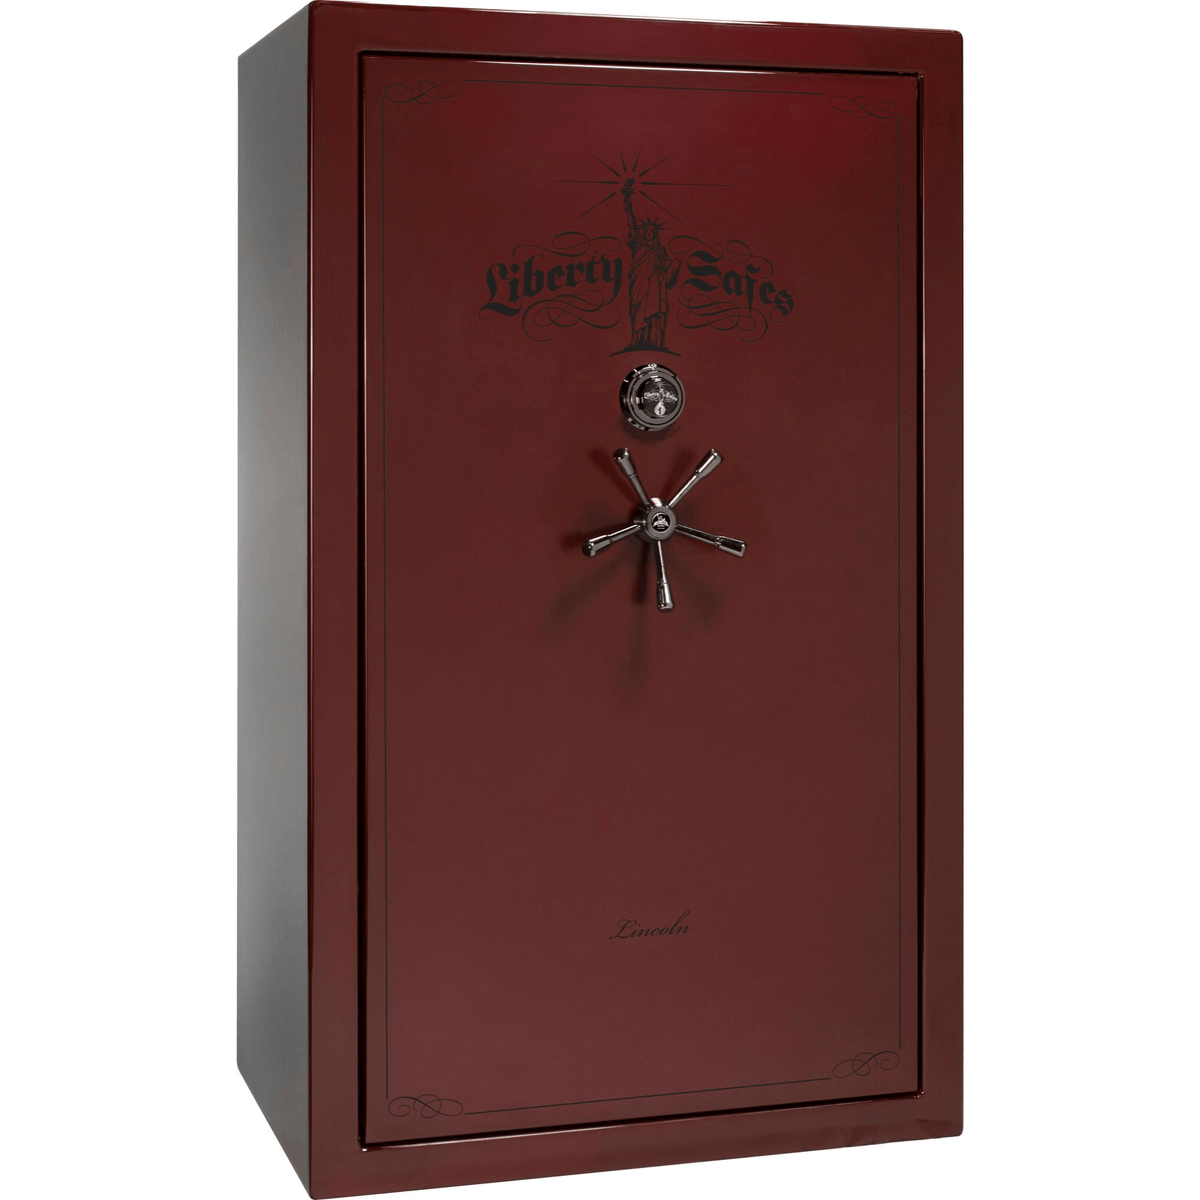 Liberty Lincoln 50 Safe in Burgundy Gloss with Black Chrome Mechanical Lock.